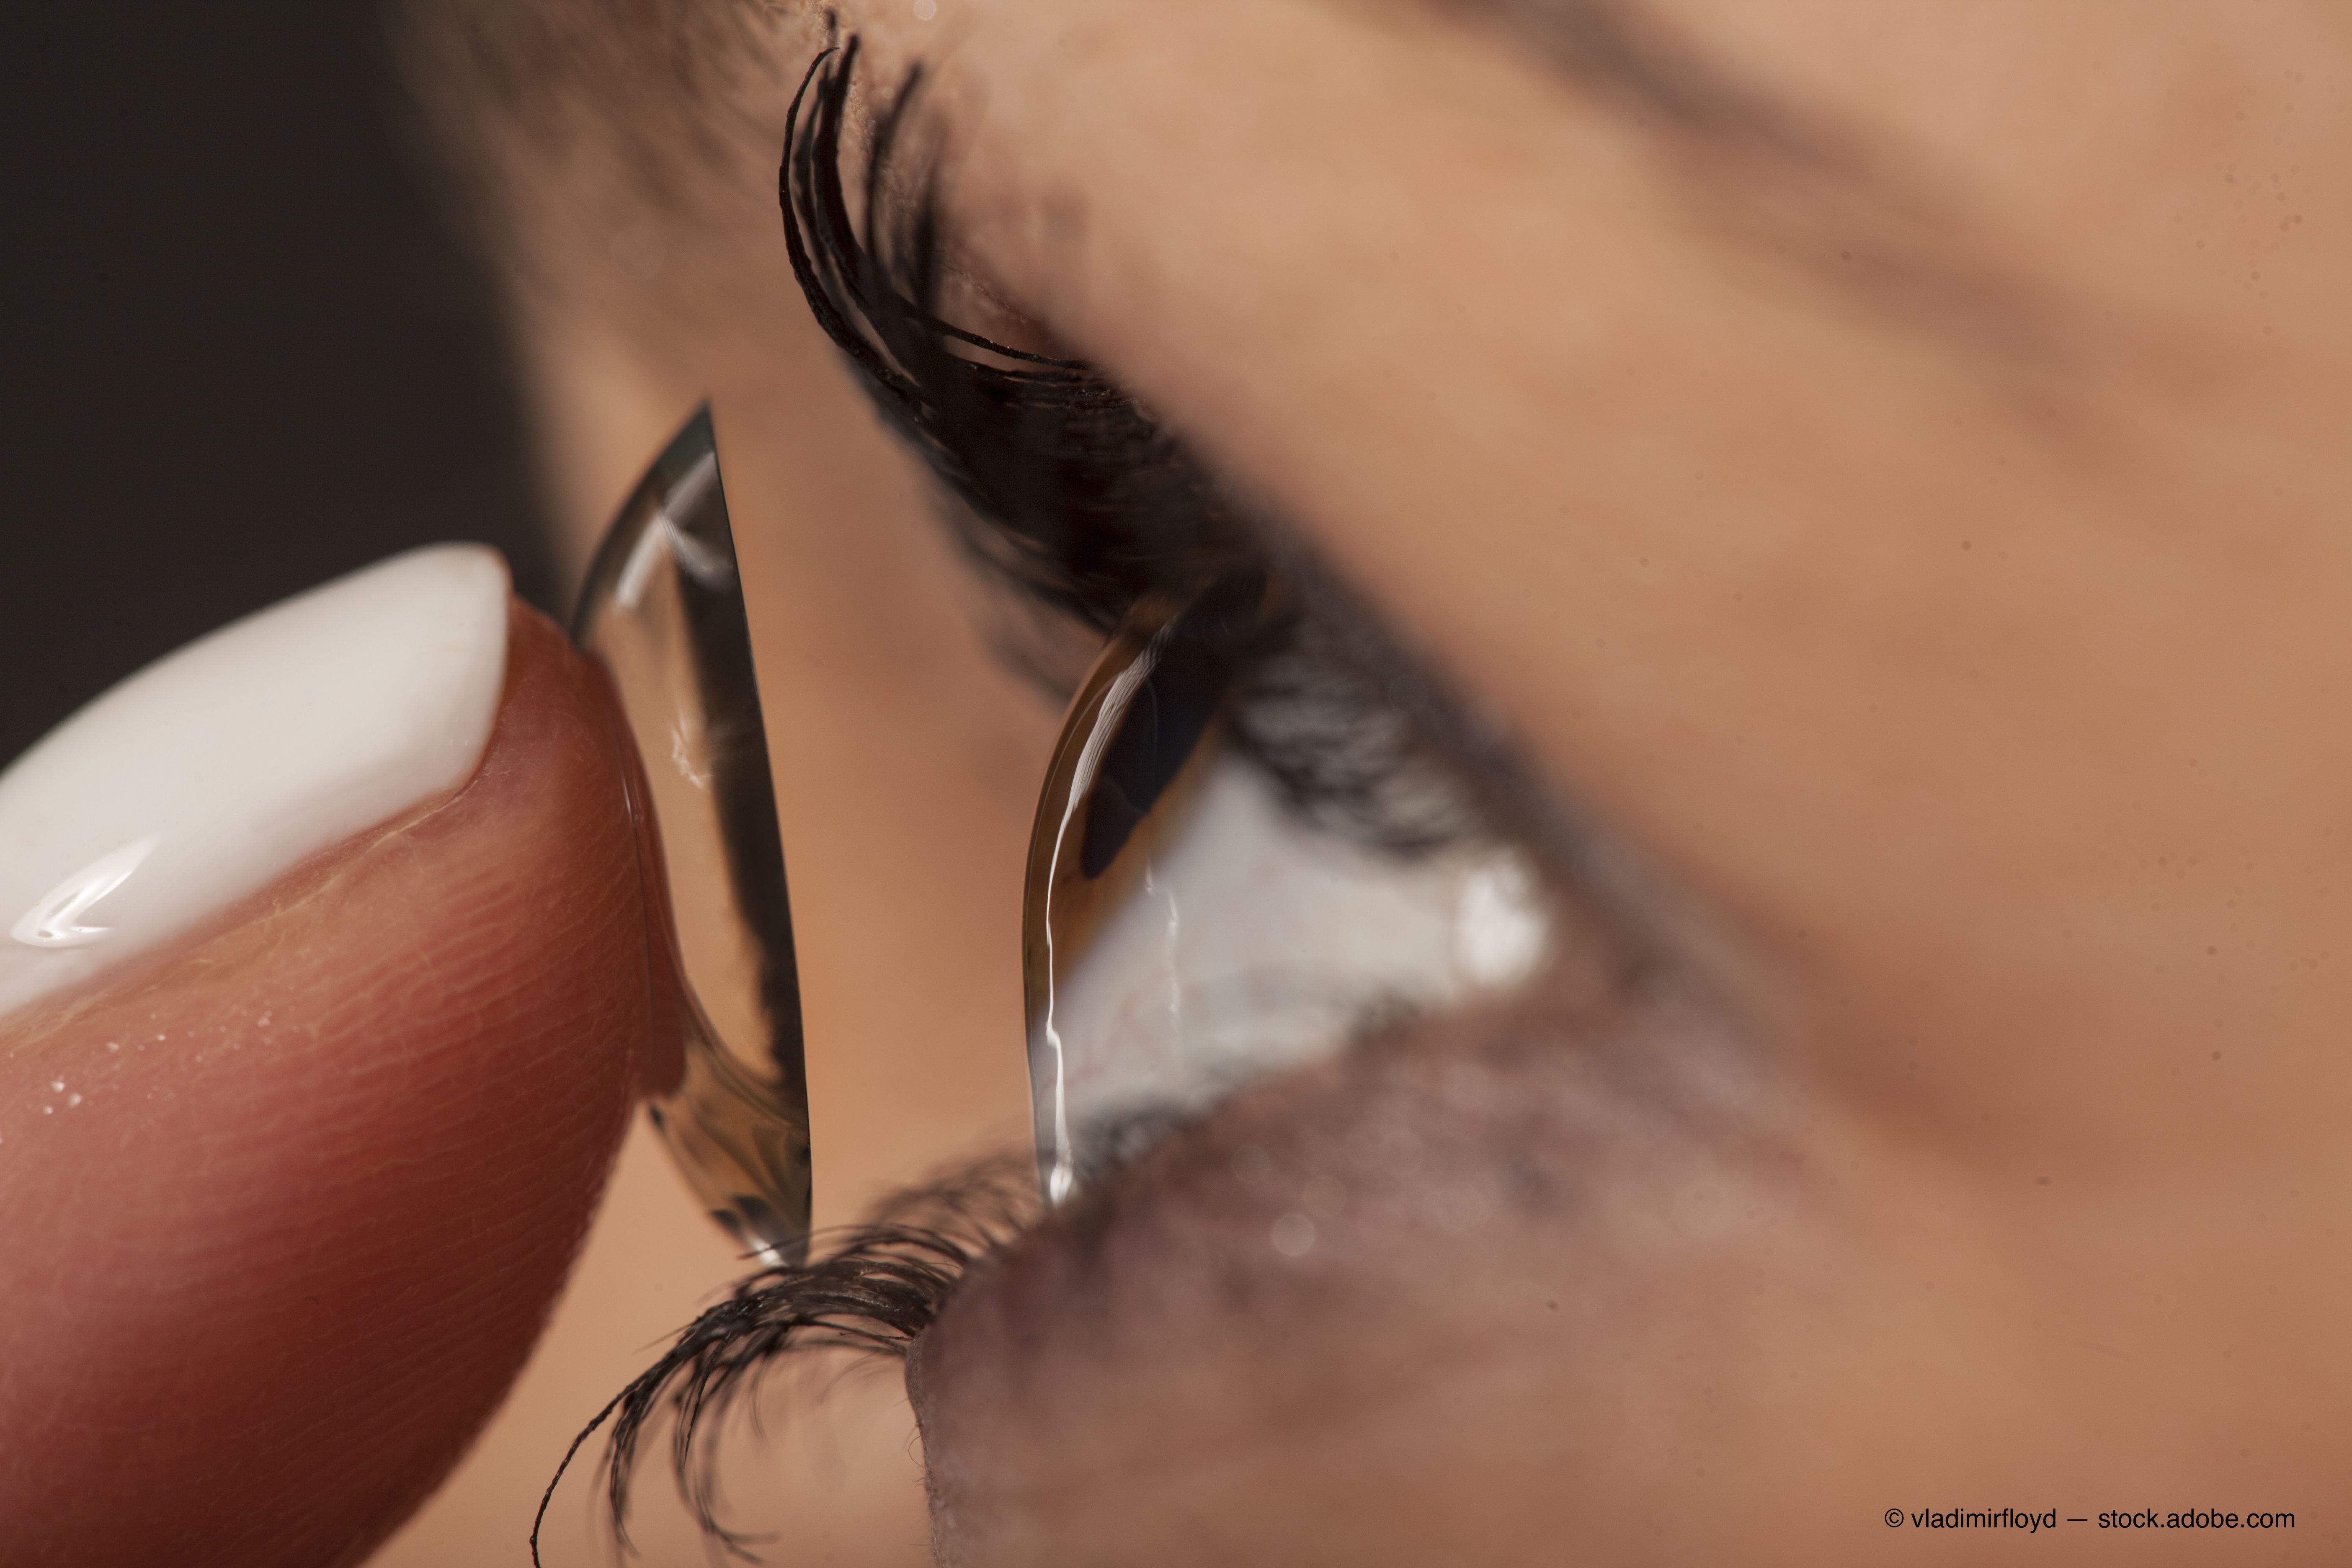 New research addresses contact lens myths, misconceptions